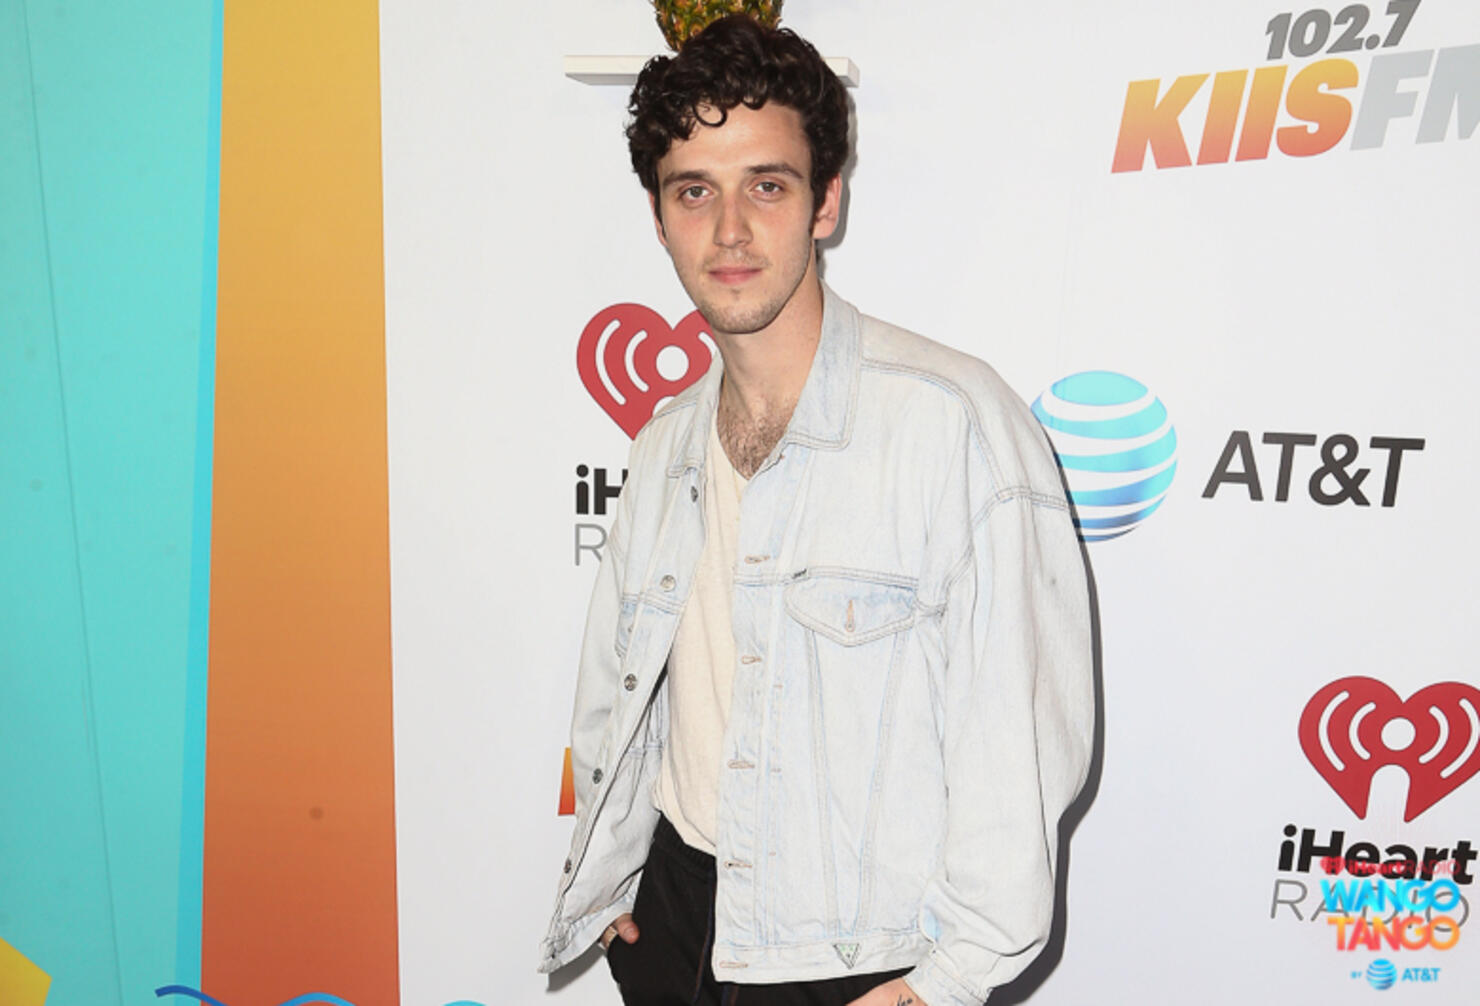 Lauv arrives at the 2018 iHeartRadio Wango Tango by AT&T at Banc of California Stadium on June 2, 2018 in Los Angeles, California